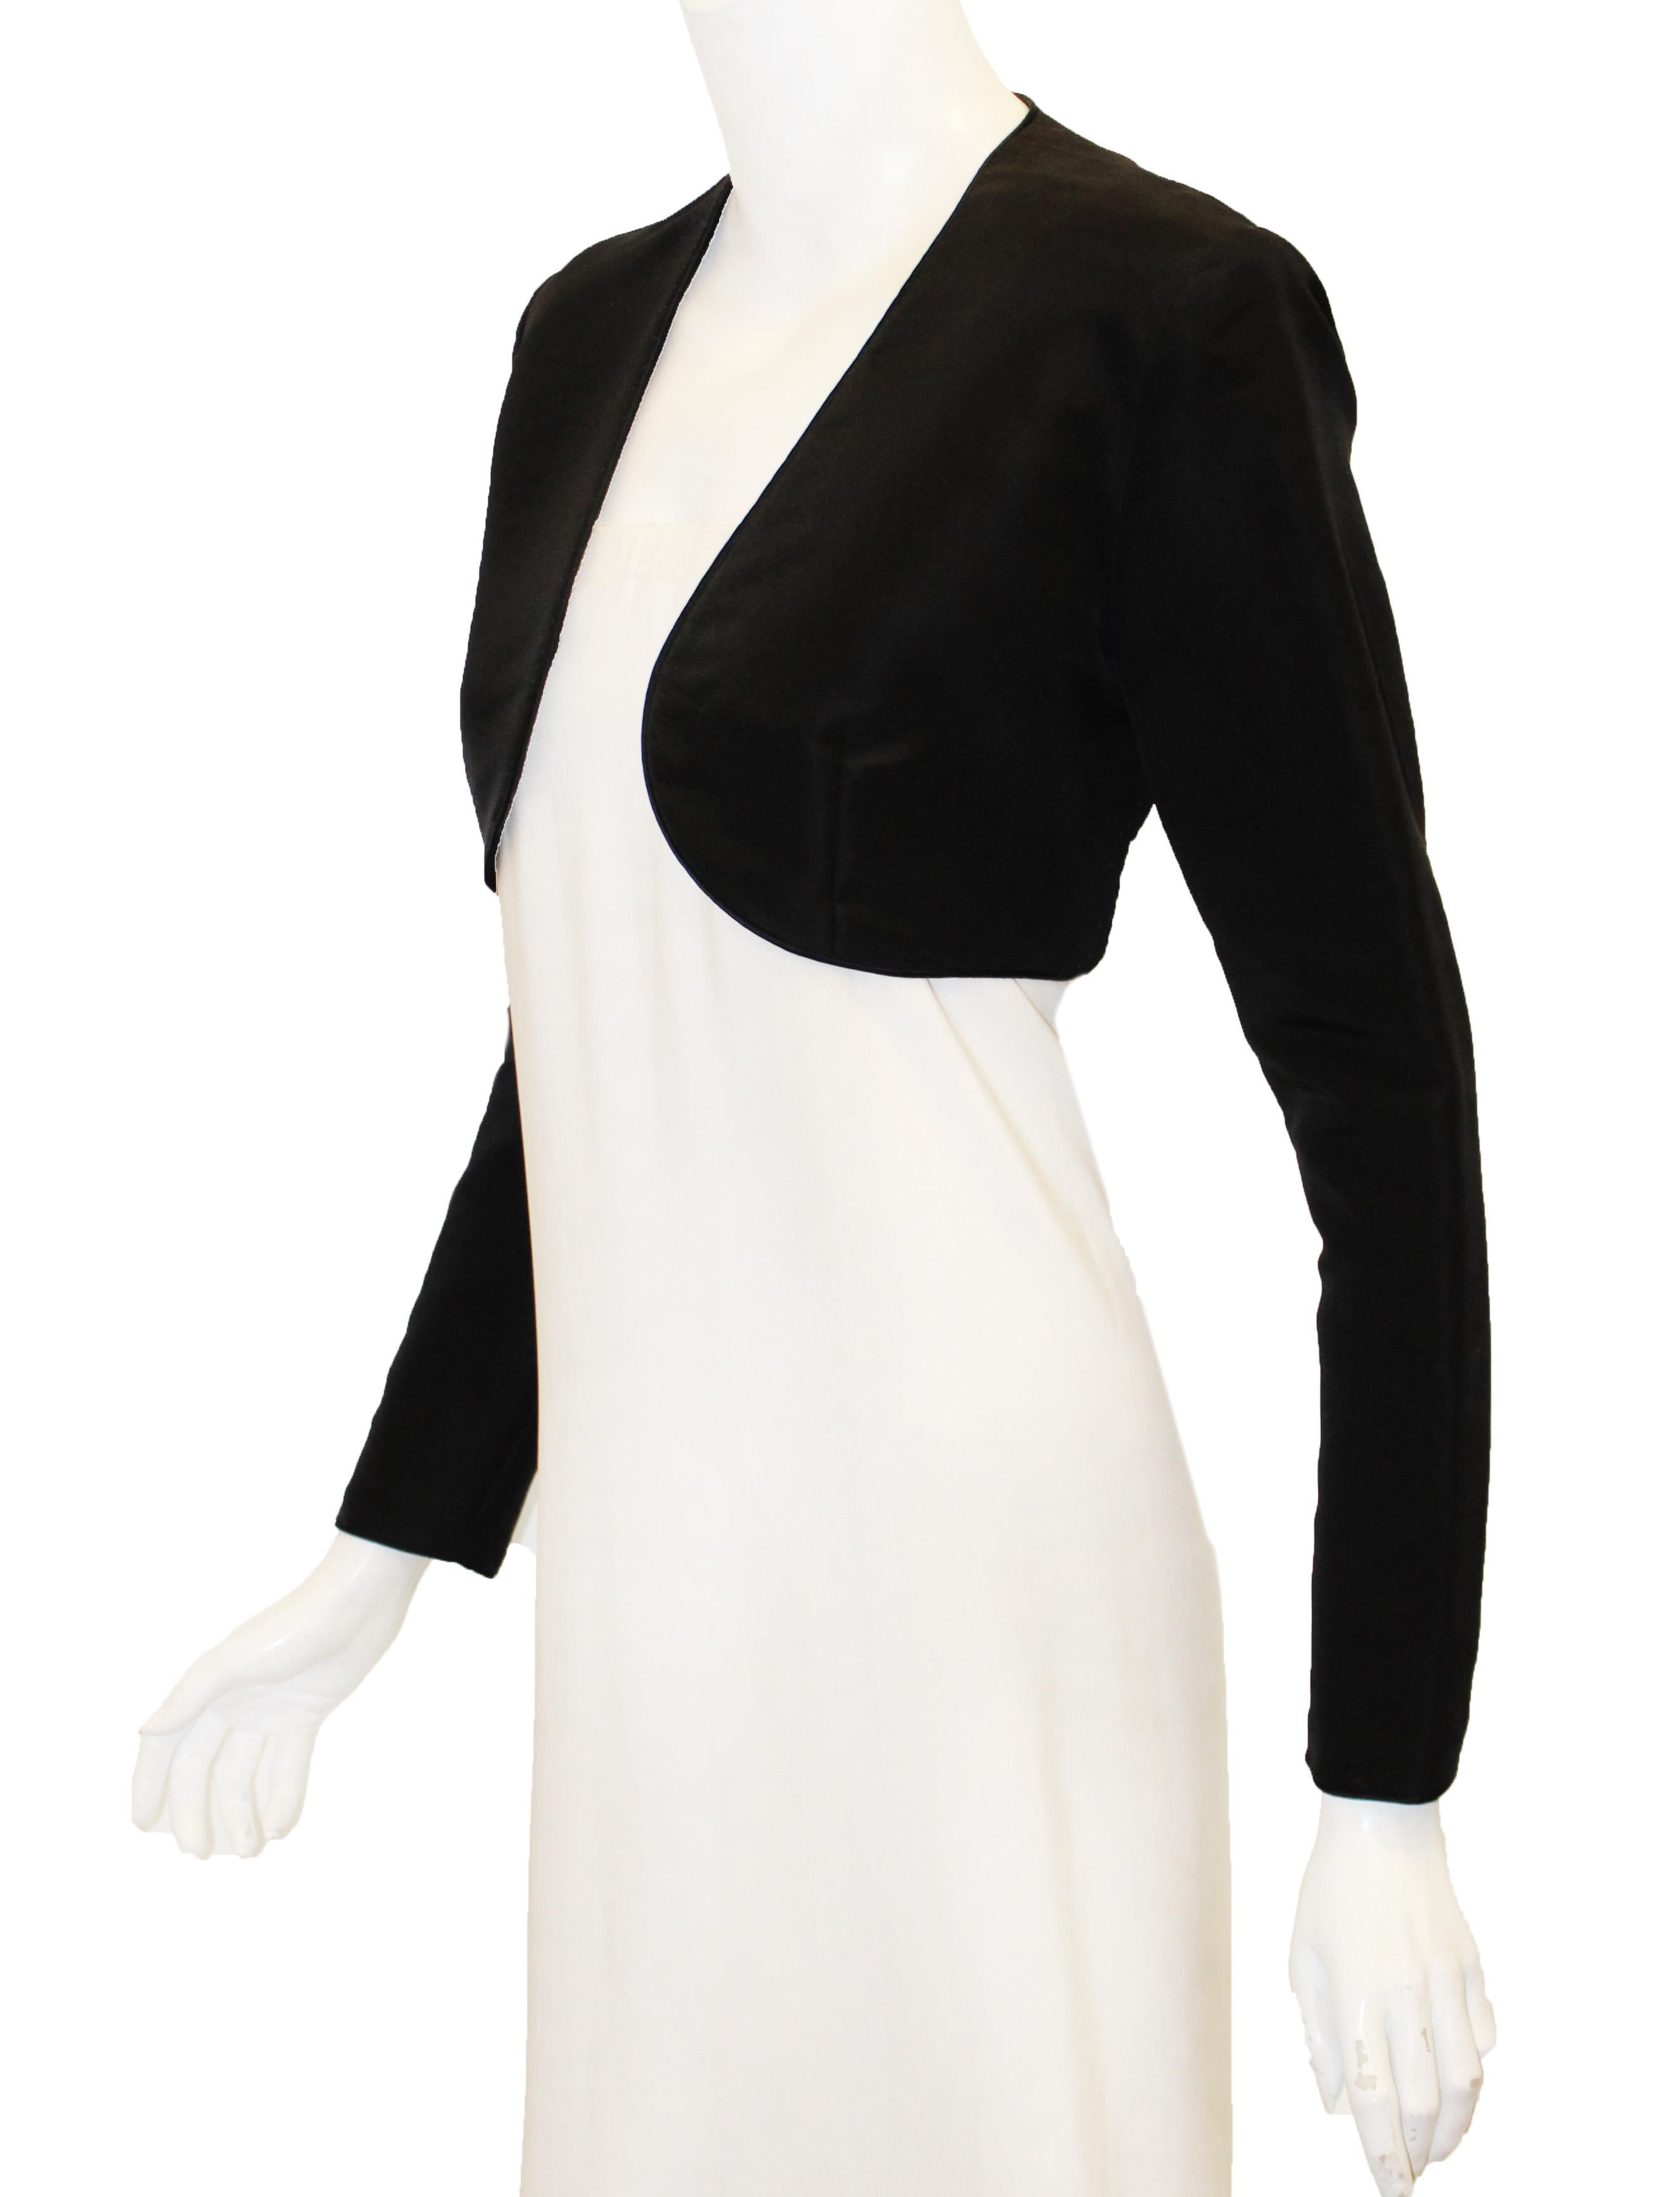 Oscar de la Renta black bolero silk jacket is fully lined in black satin.  This no collar, minimal jacket is practical and easy to wear with a camisole, sleeveless dress or gown as a cover up.  The border is trimmed with rolled cord of same fabric. 